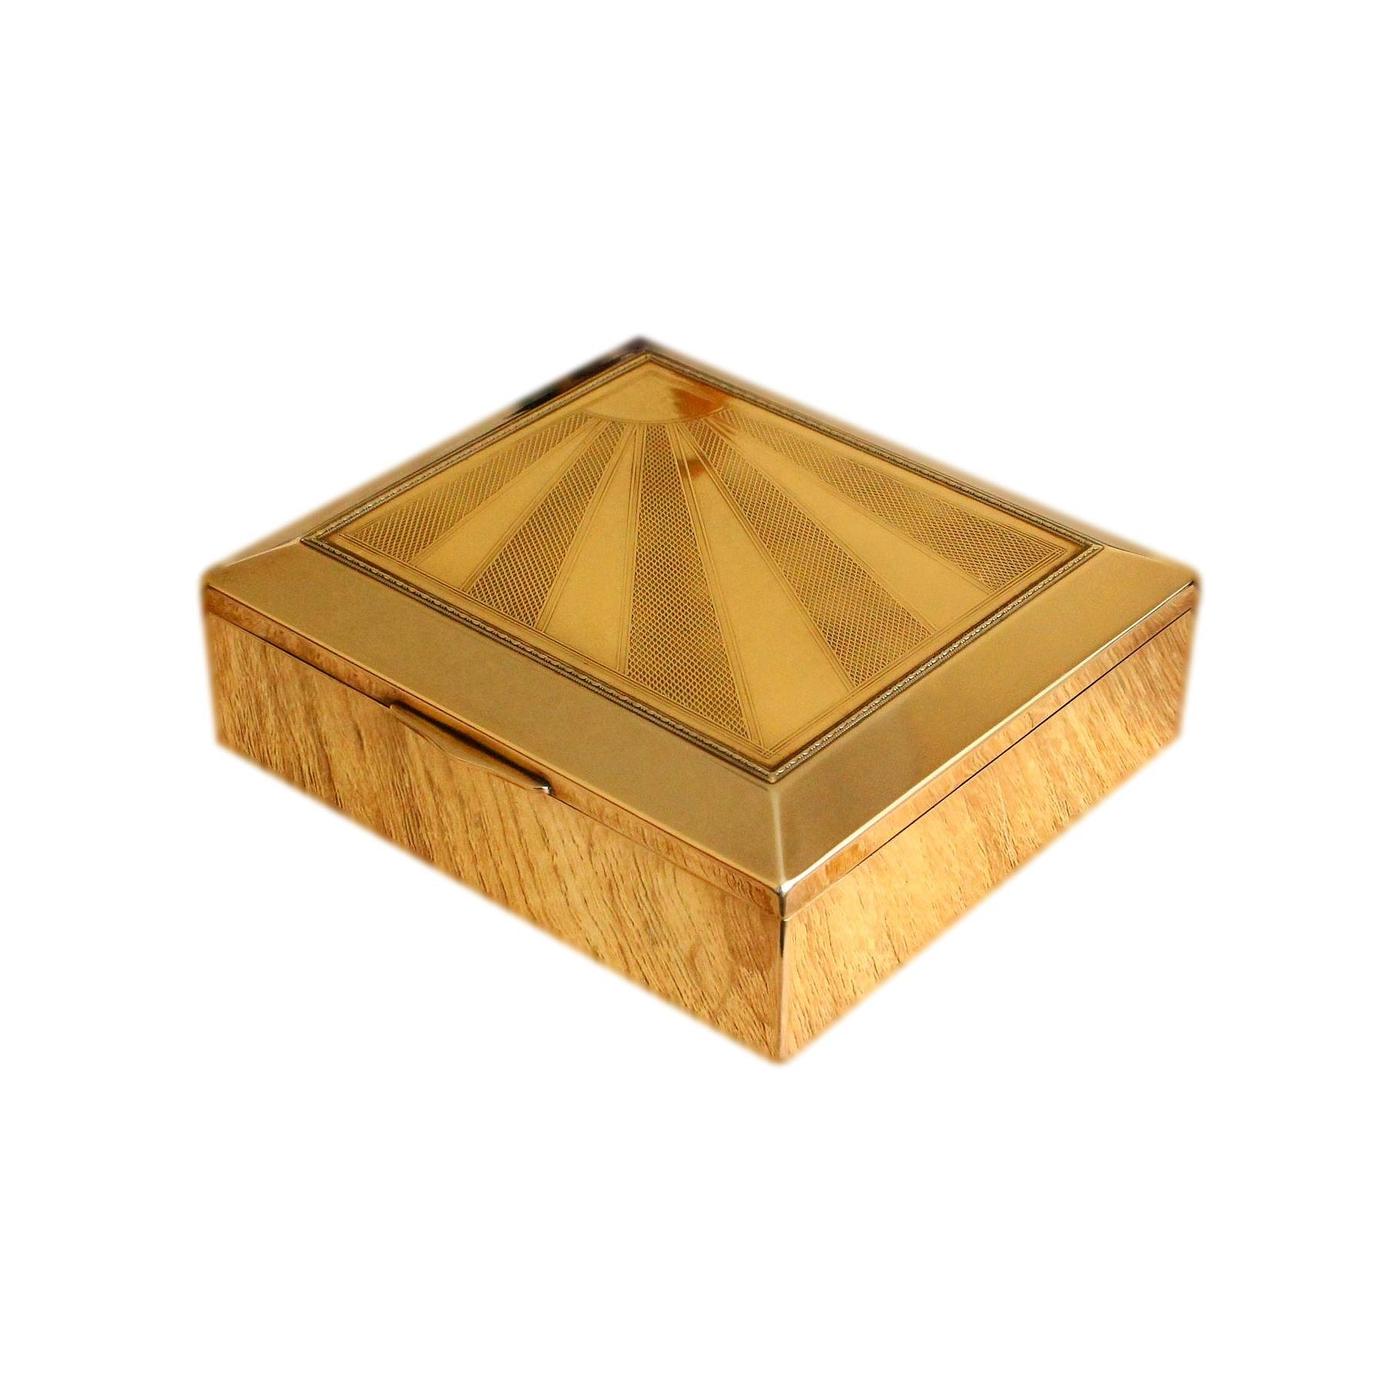 Solid Brass Art Deco Jewellery Box With Engraved Sunray Design